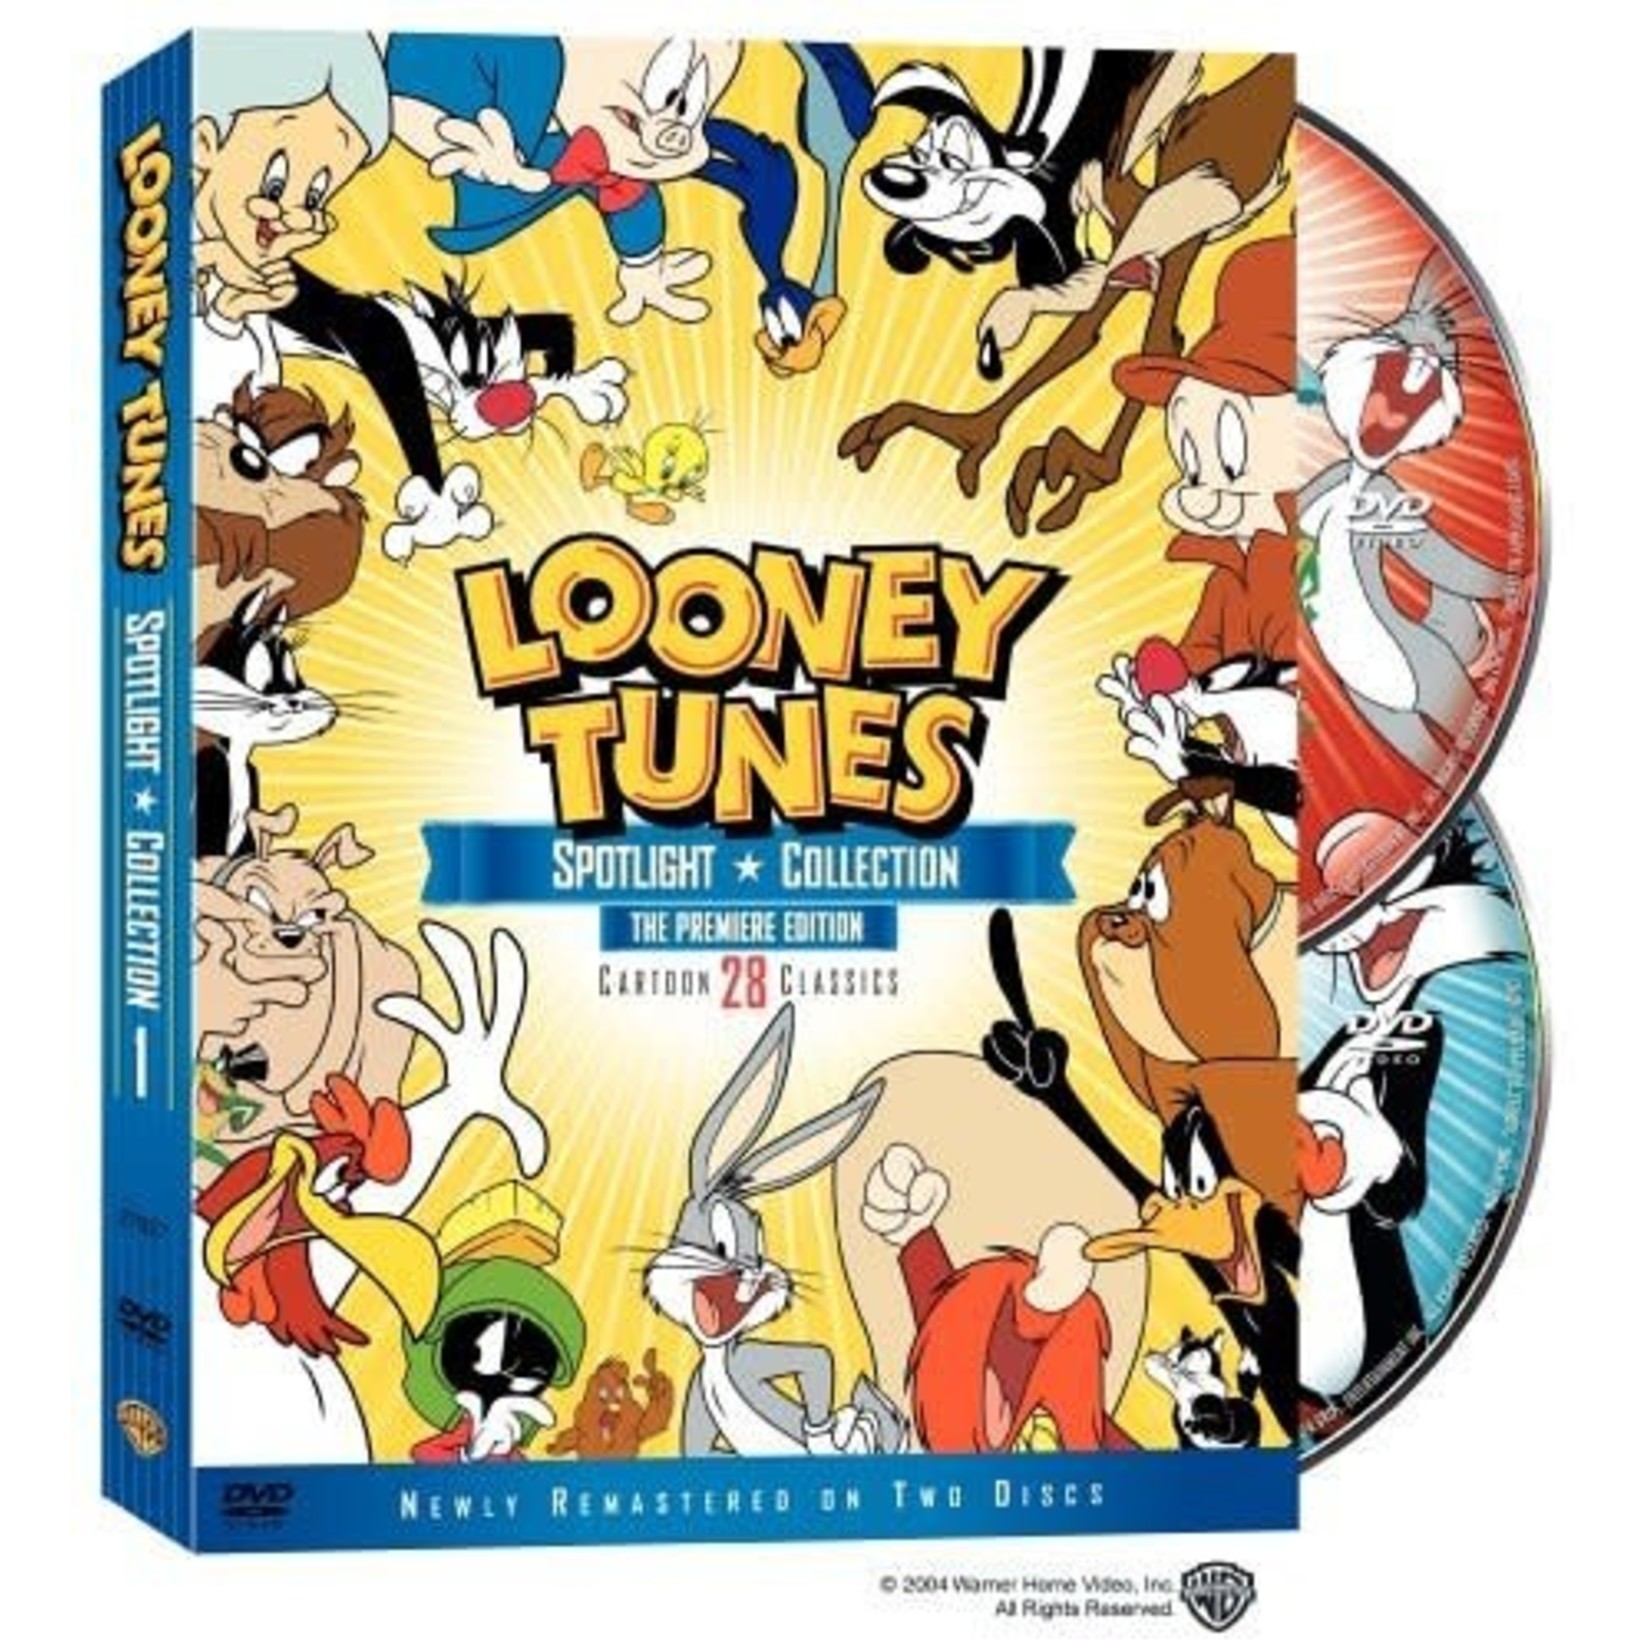 Looney Tunes - Spotlight Collection 1 [USED 2DVD]